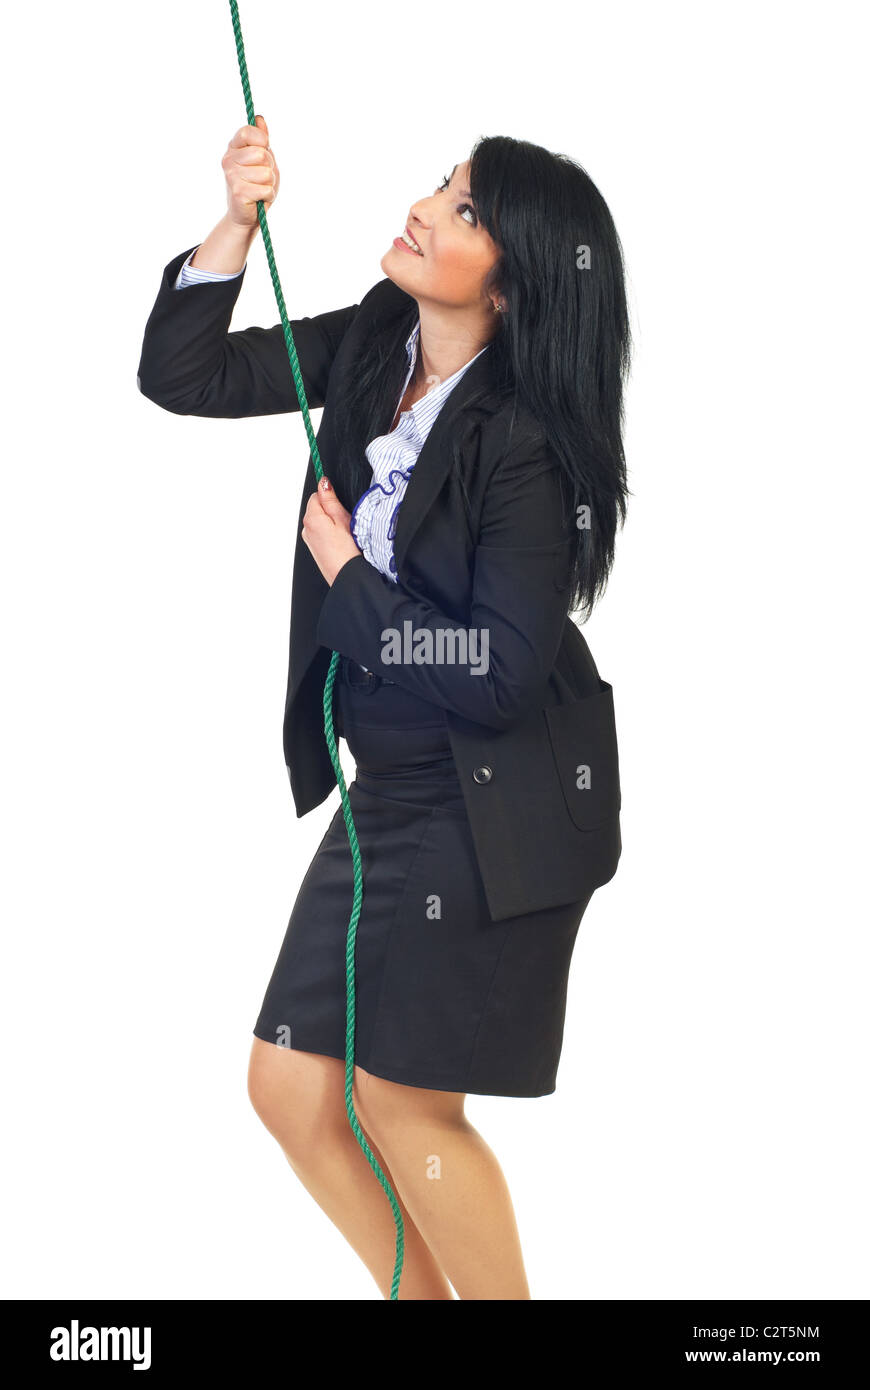 Smiling business woman trying to climbing a rope and aspirate to success isolated on white background Stock Photo